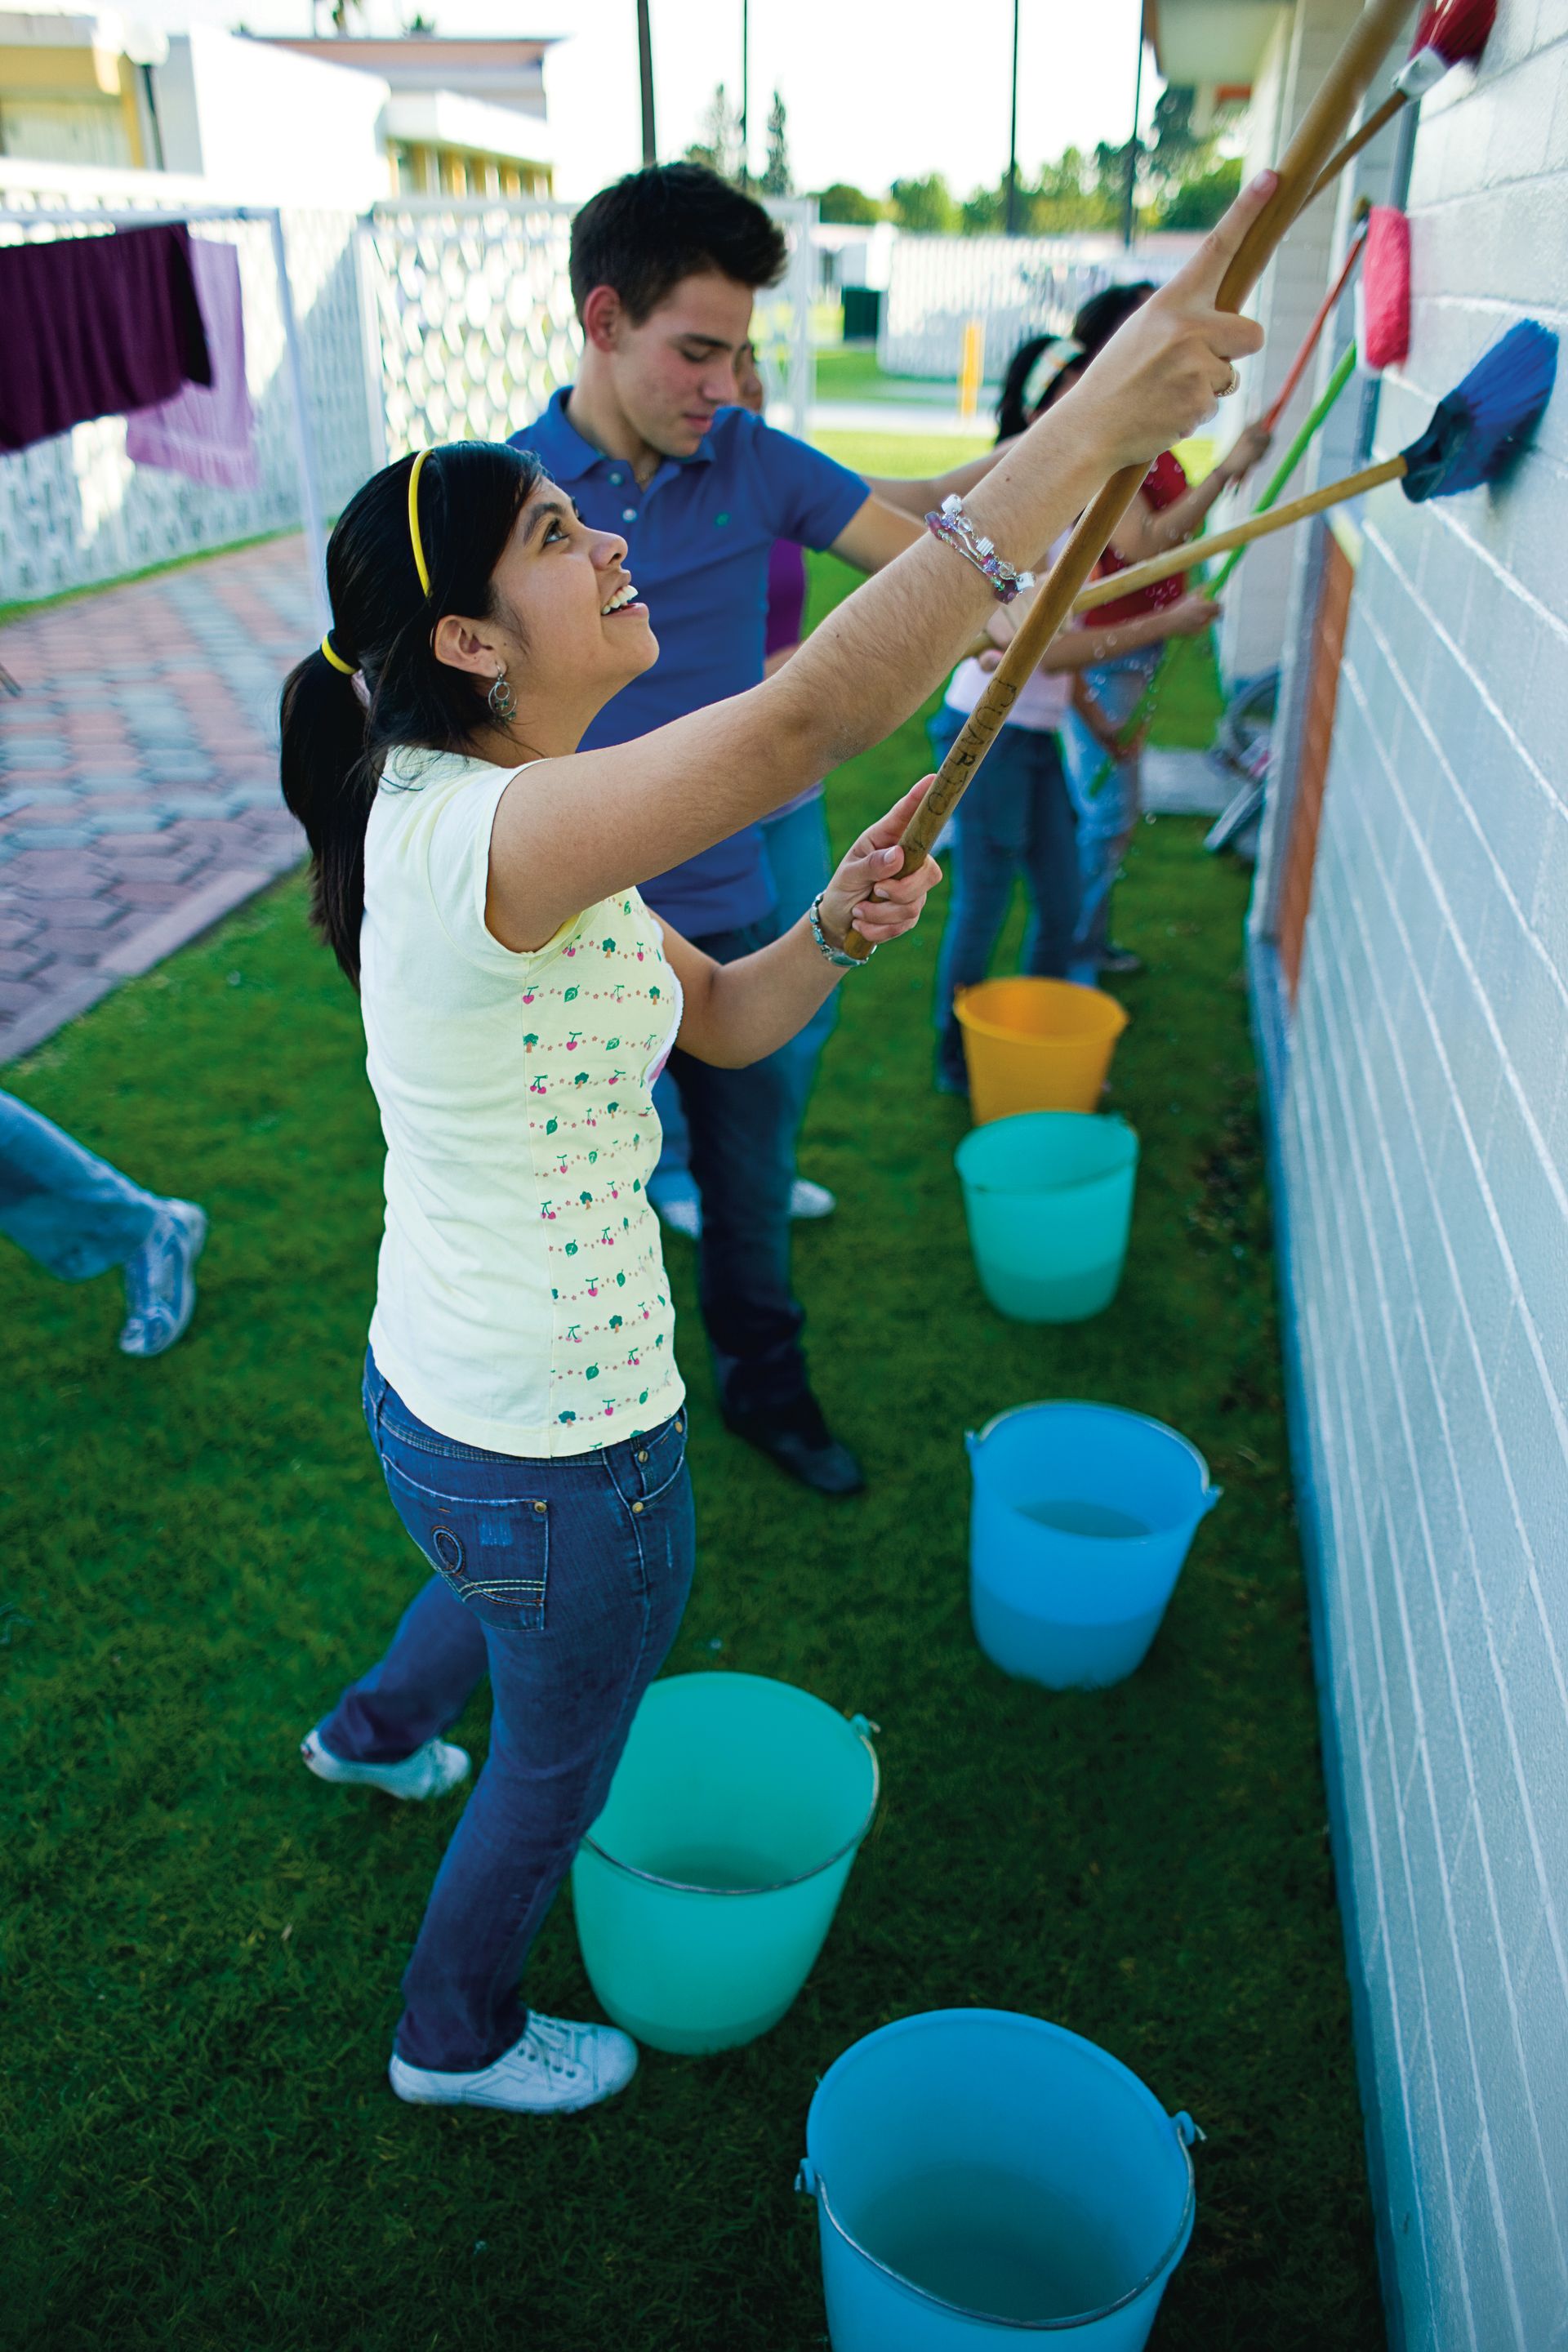 A group of youth clean white walls outside with brushes and water.